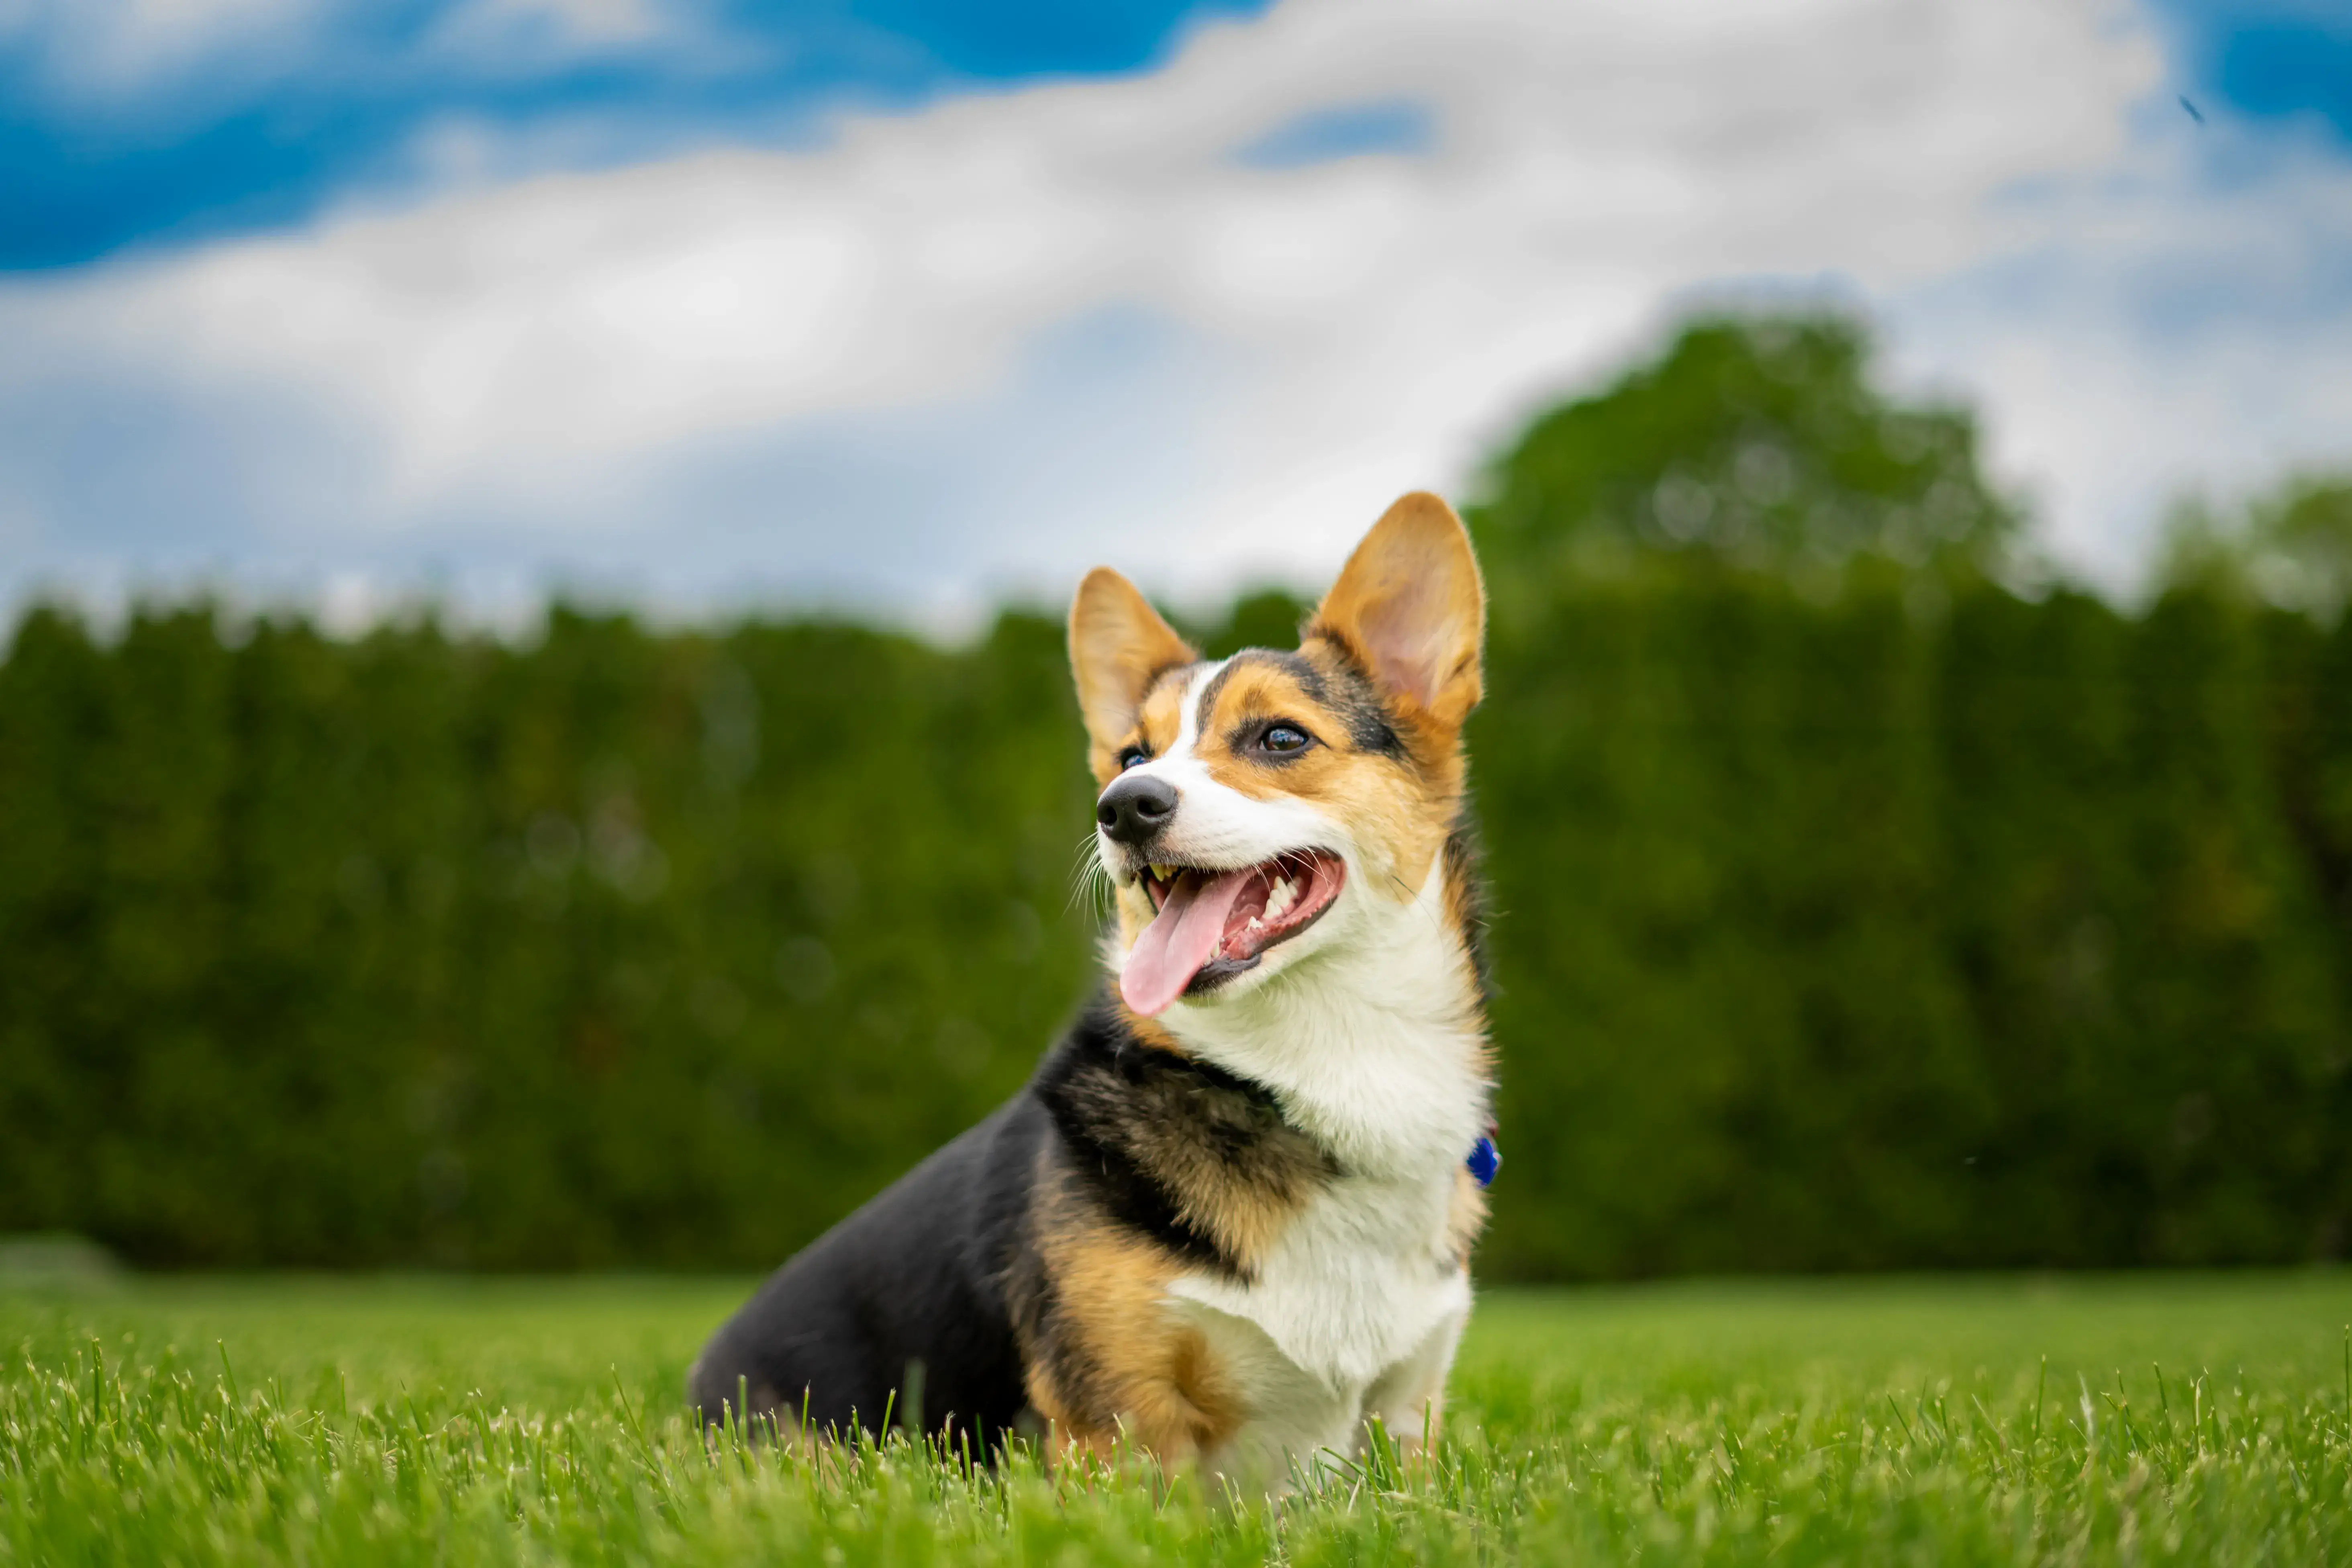 Tri-colored Corgi in warm spring sunlight sitting in short grass with a treeline in the background and deep blue sky with white fluffy clouds